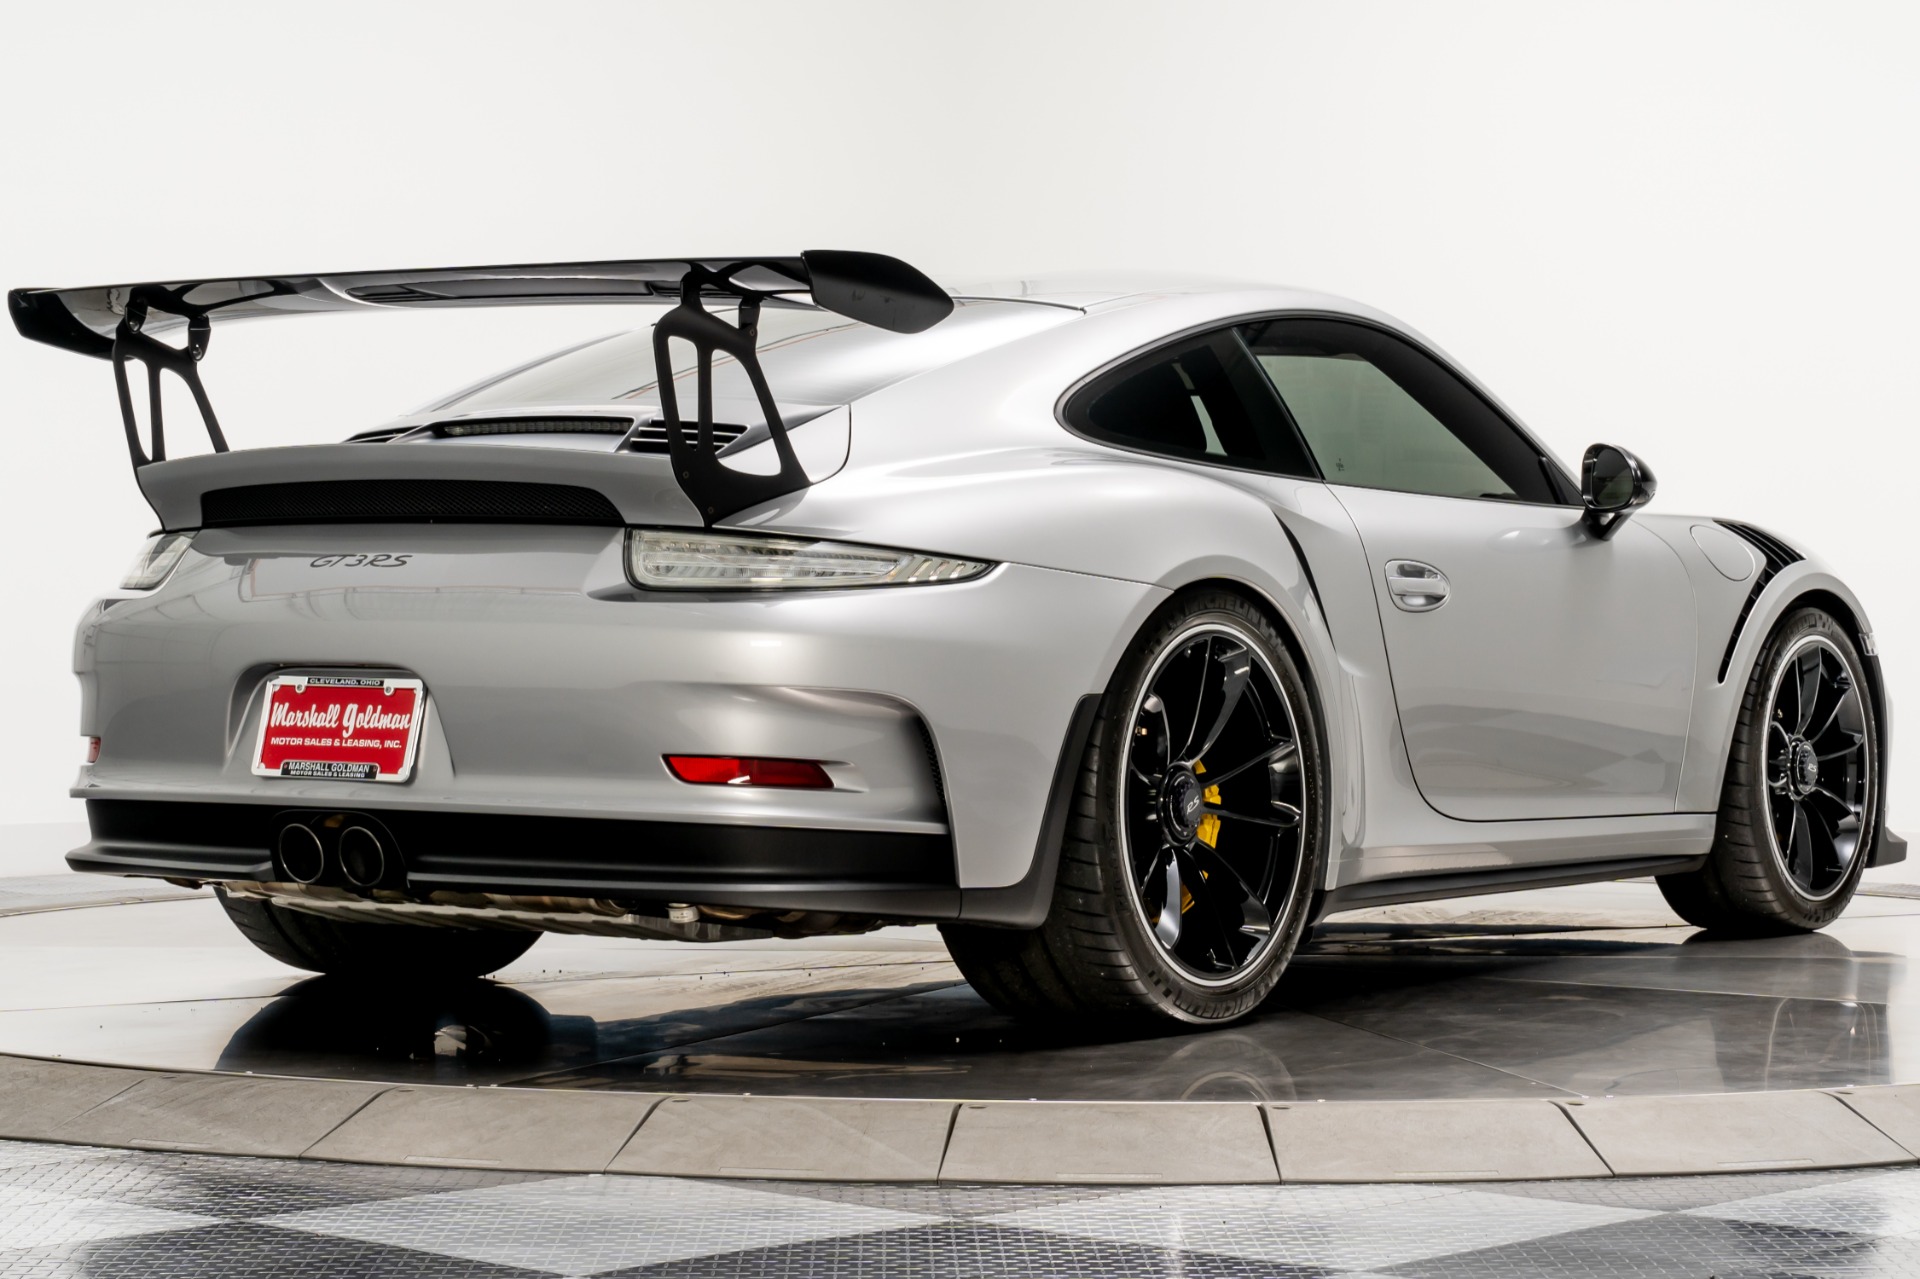 Used 2016 Porsche 911 GT3 RS For Sale (Sold)  Marshall Goldman Motor Sales  Stock #WGT3GTSBL